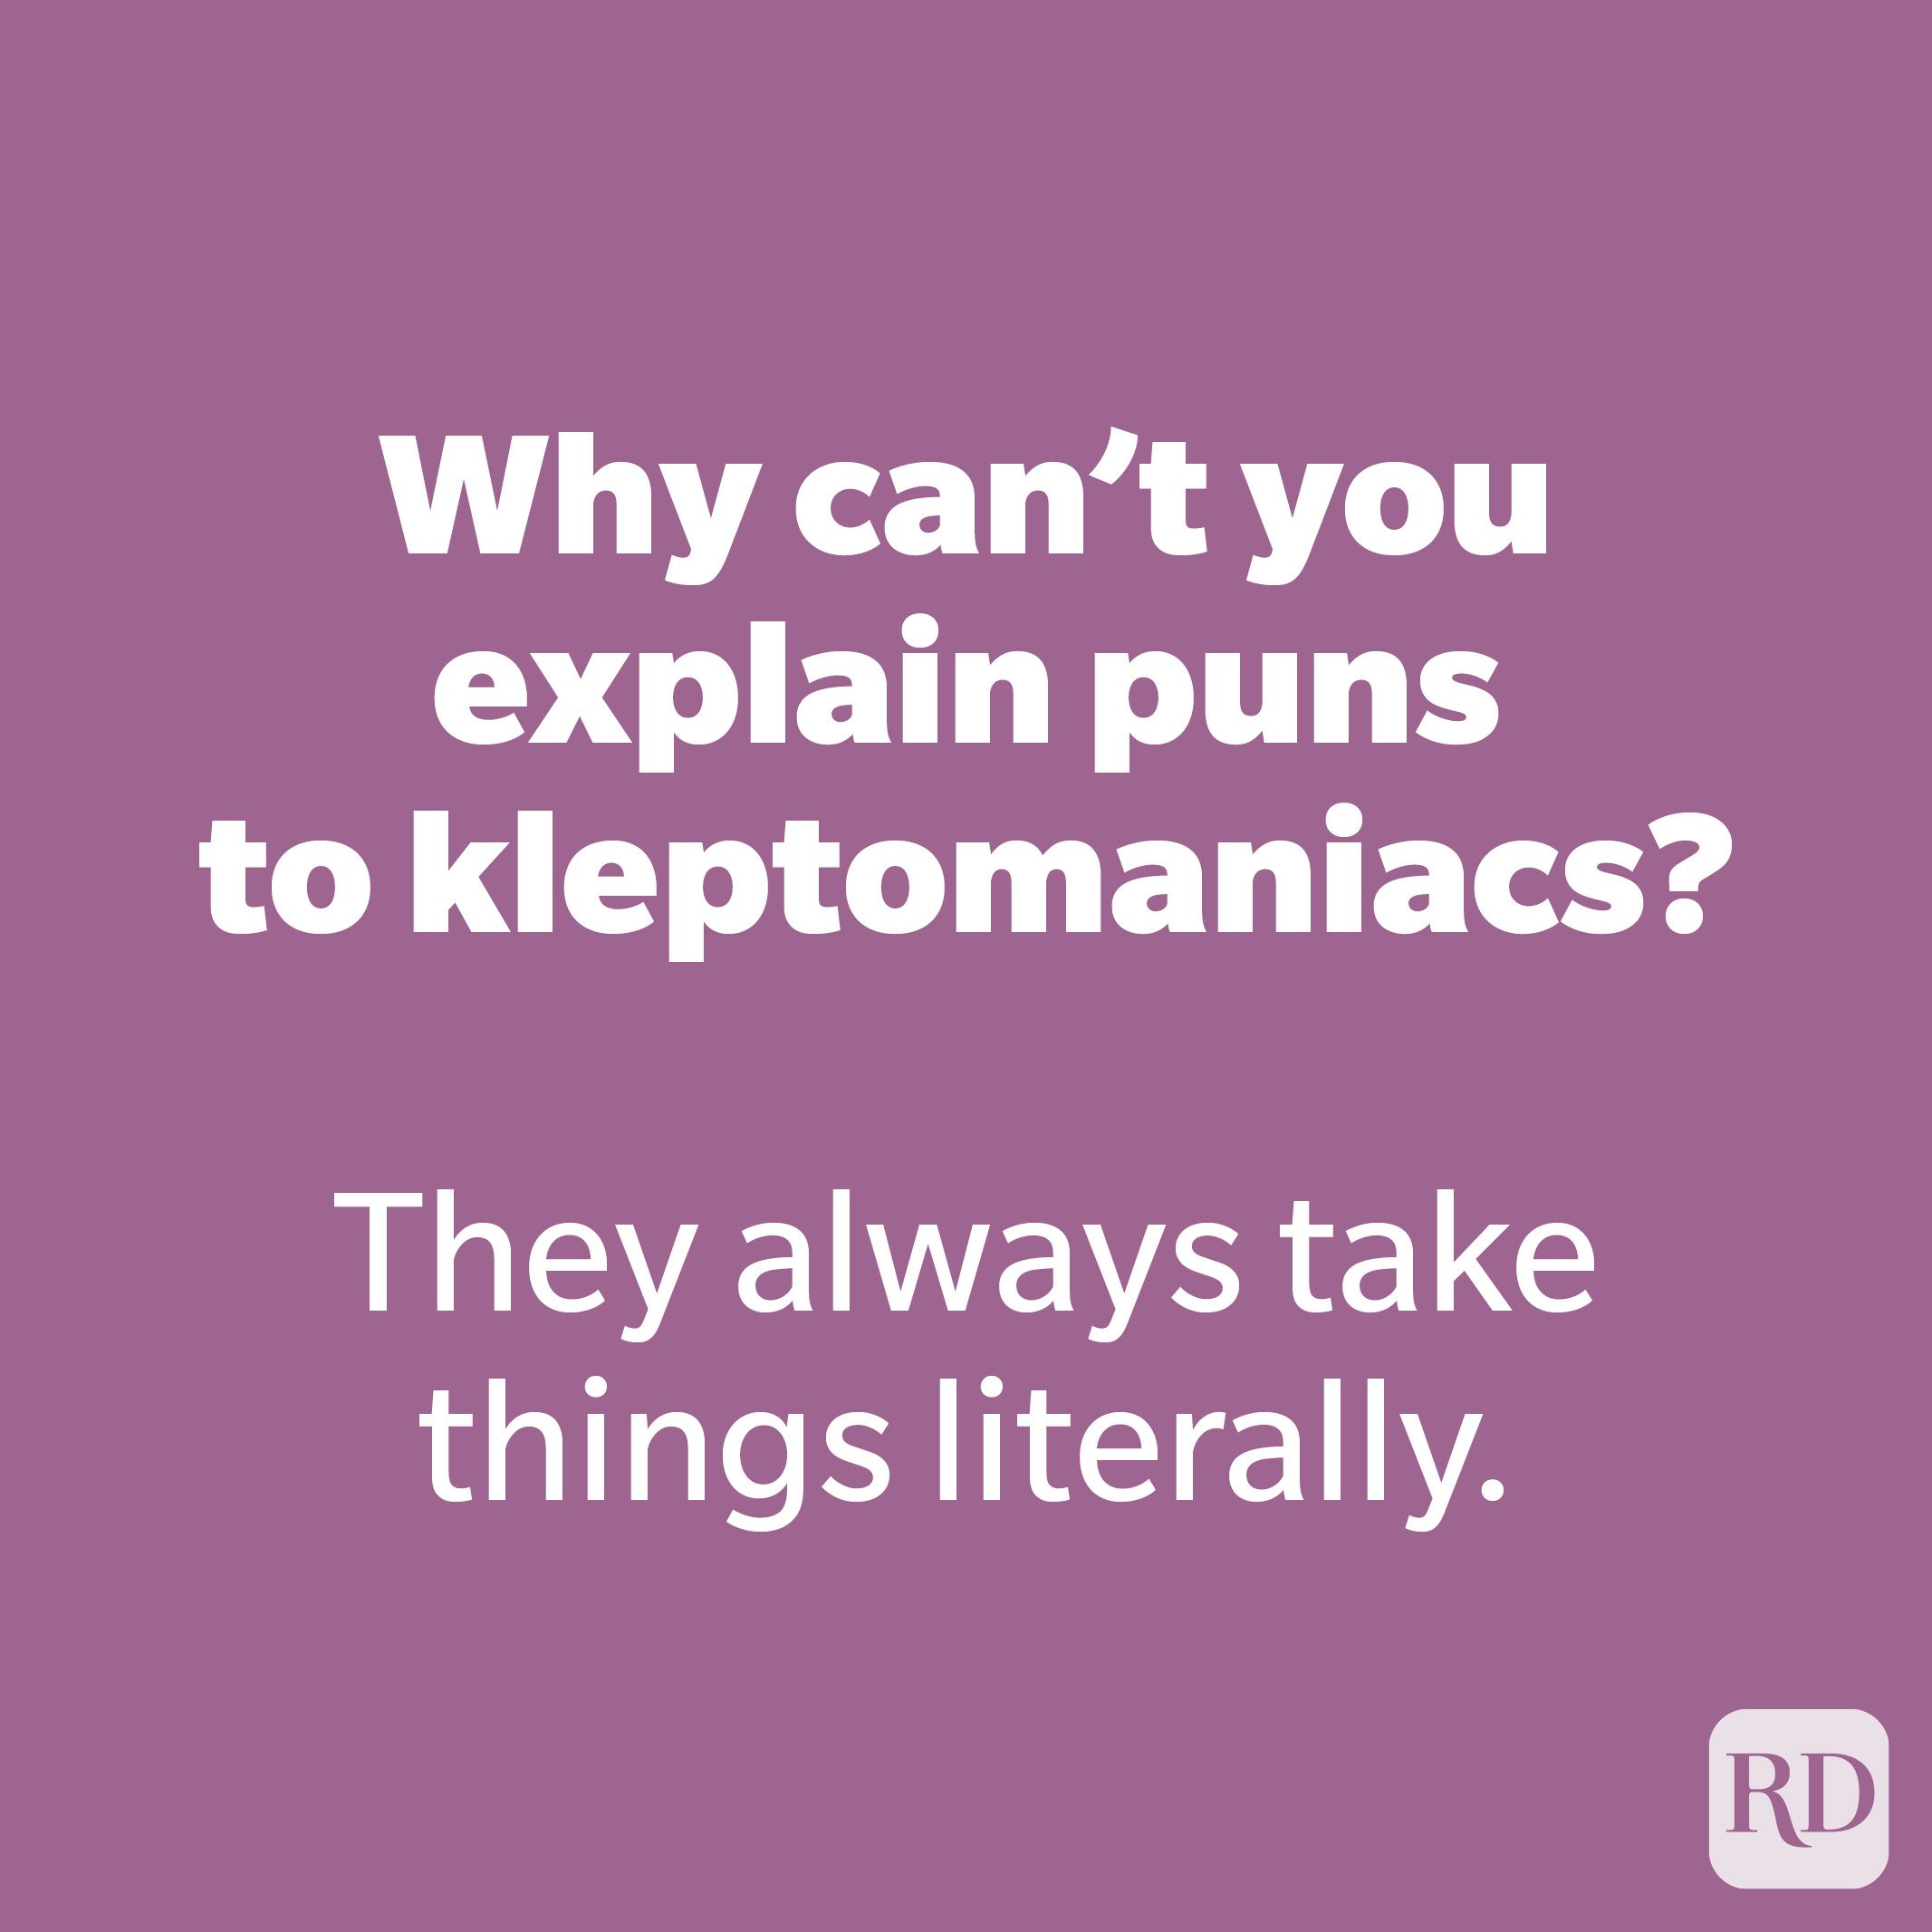 Why can't you explain puns to kleptomaniacs? 